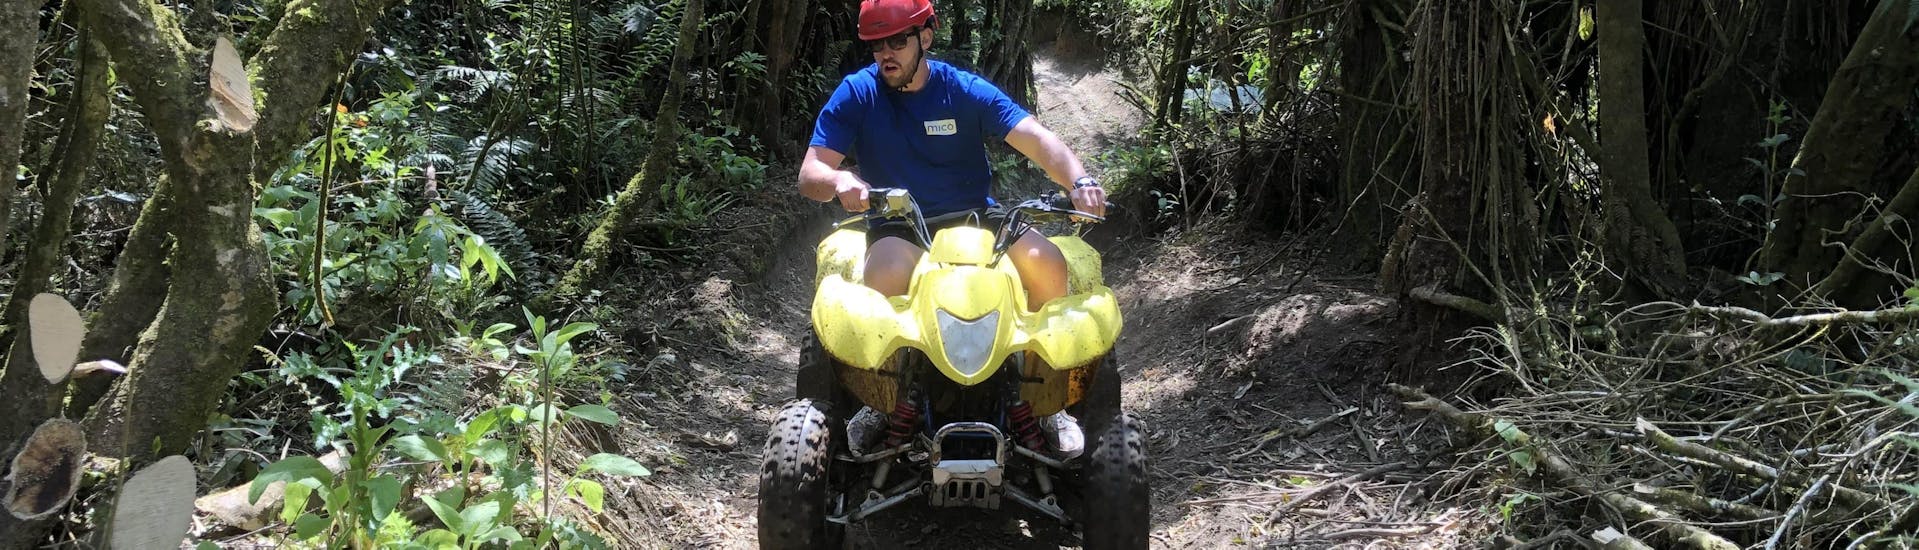 Having fun on a quad bike in Taupo organized by Taupo Quad Adventures in Taupo.